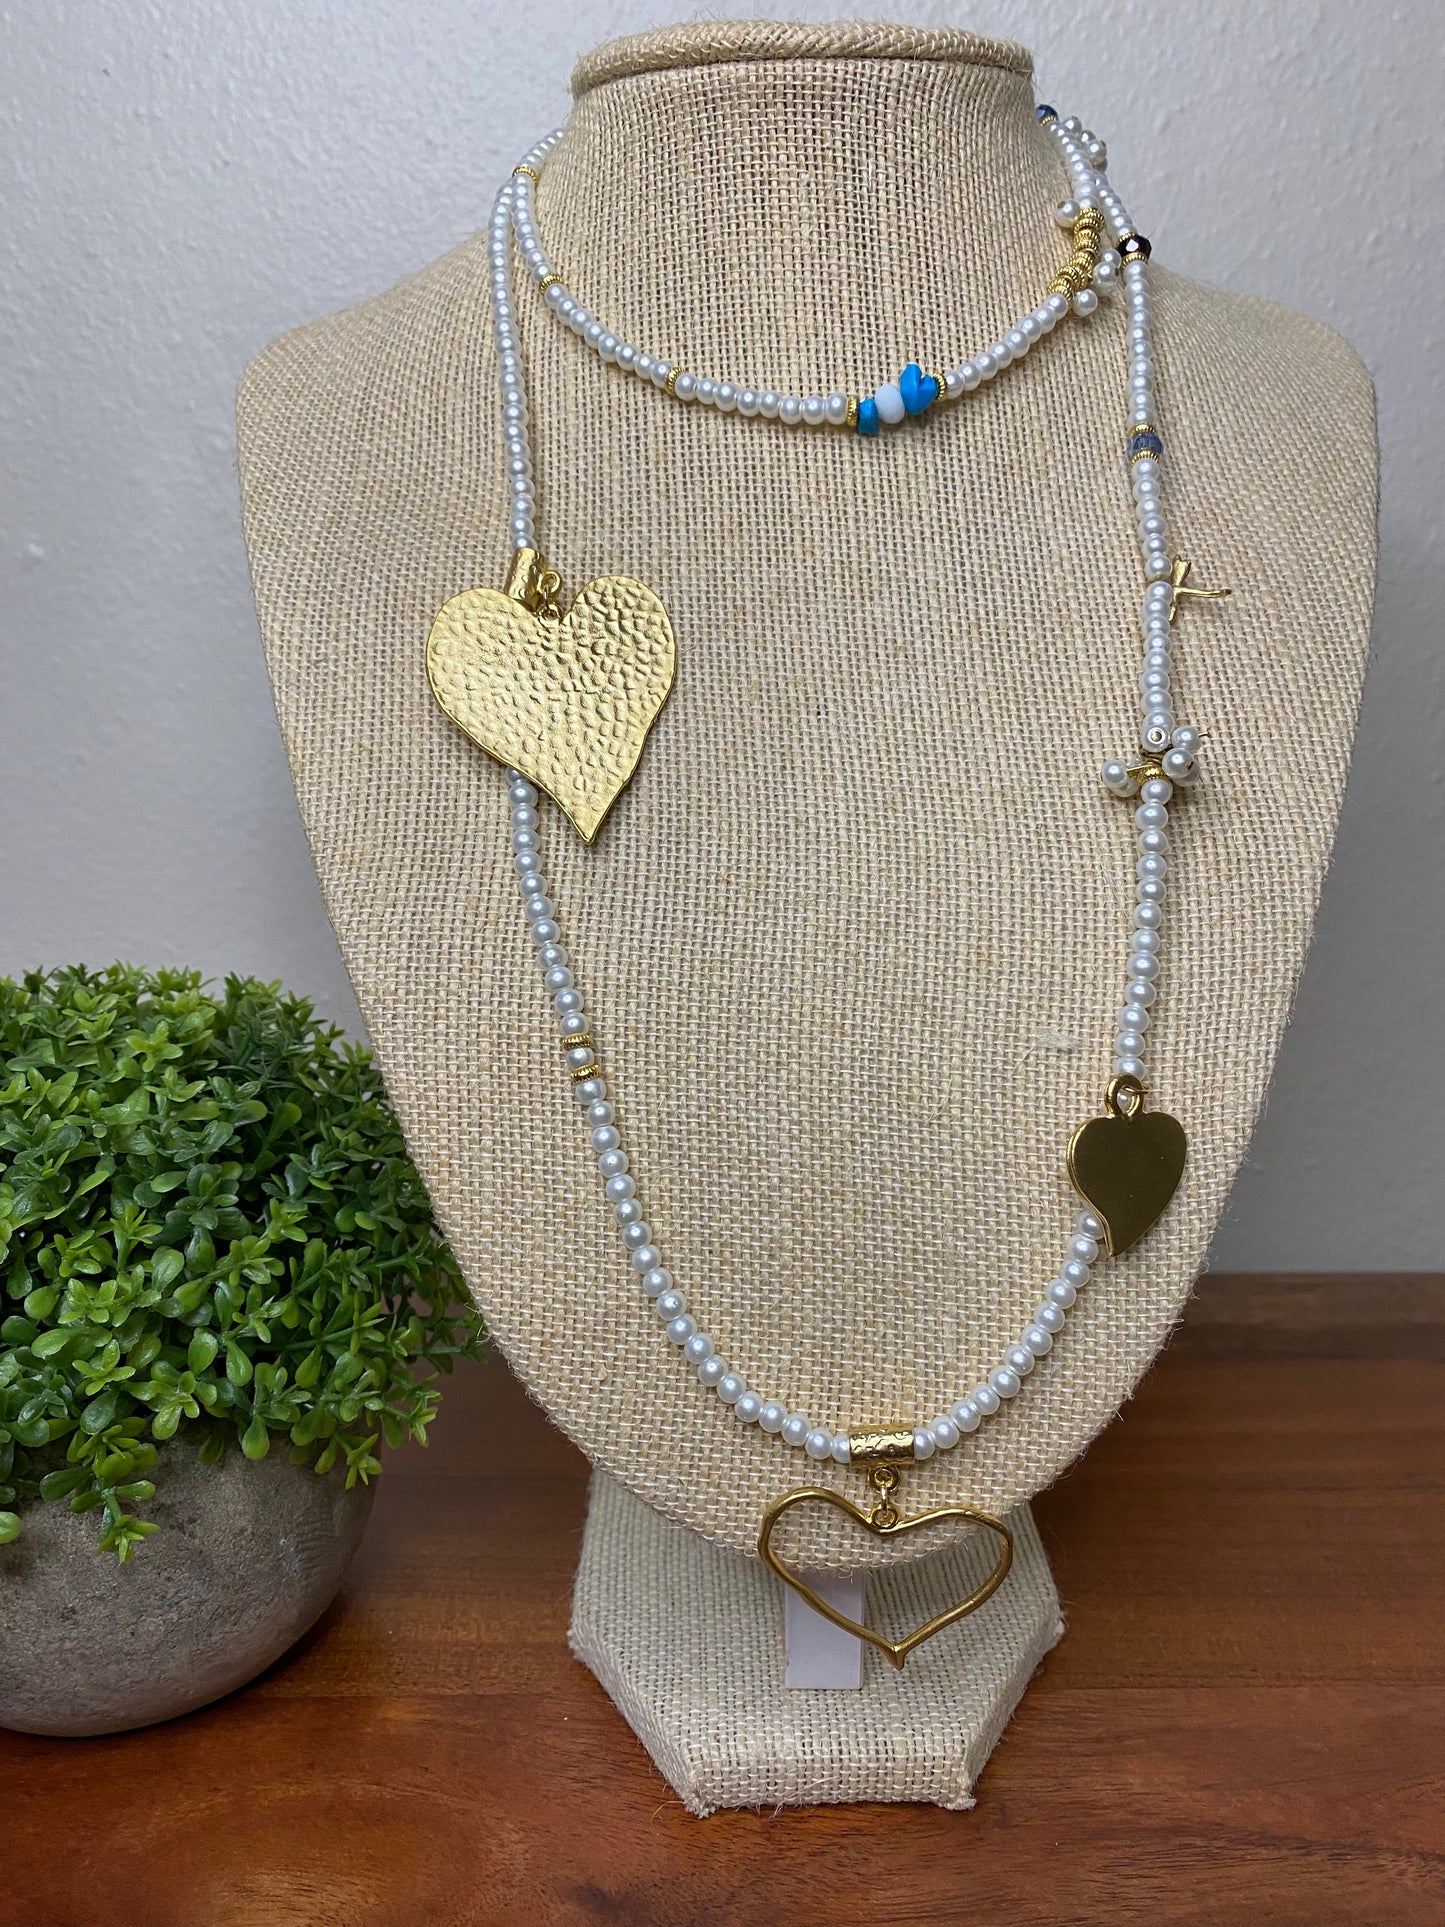 Pearls and charms necklace